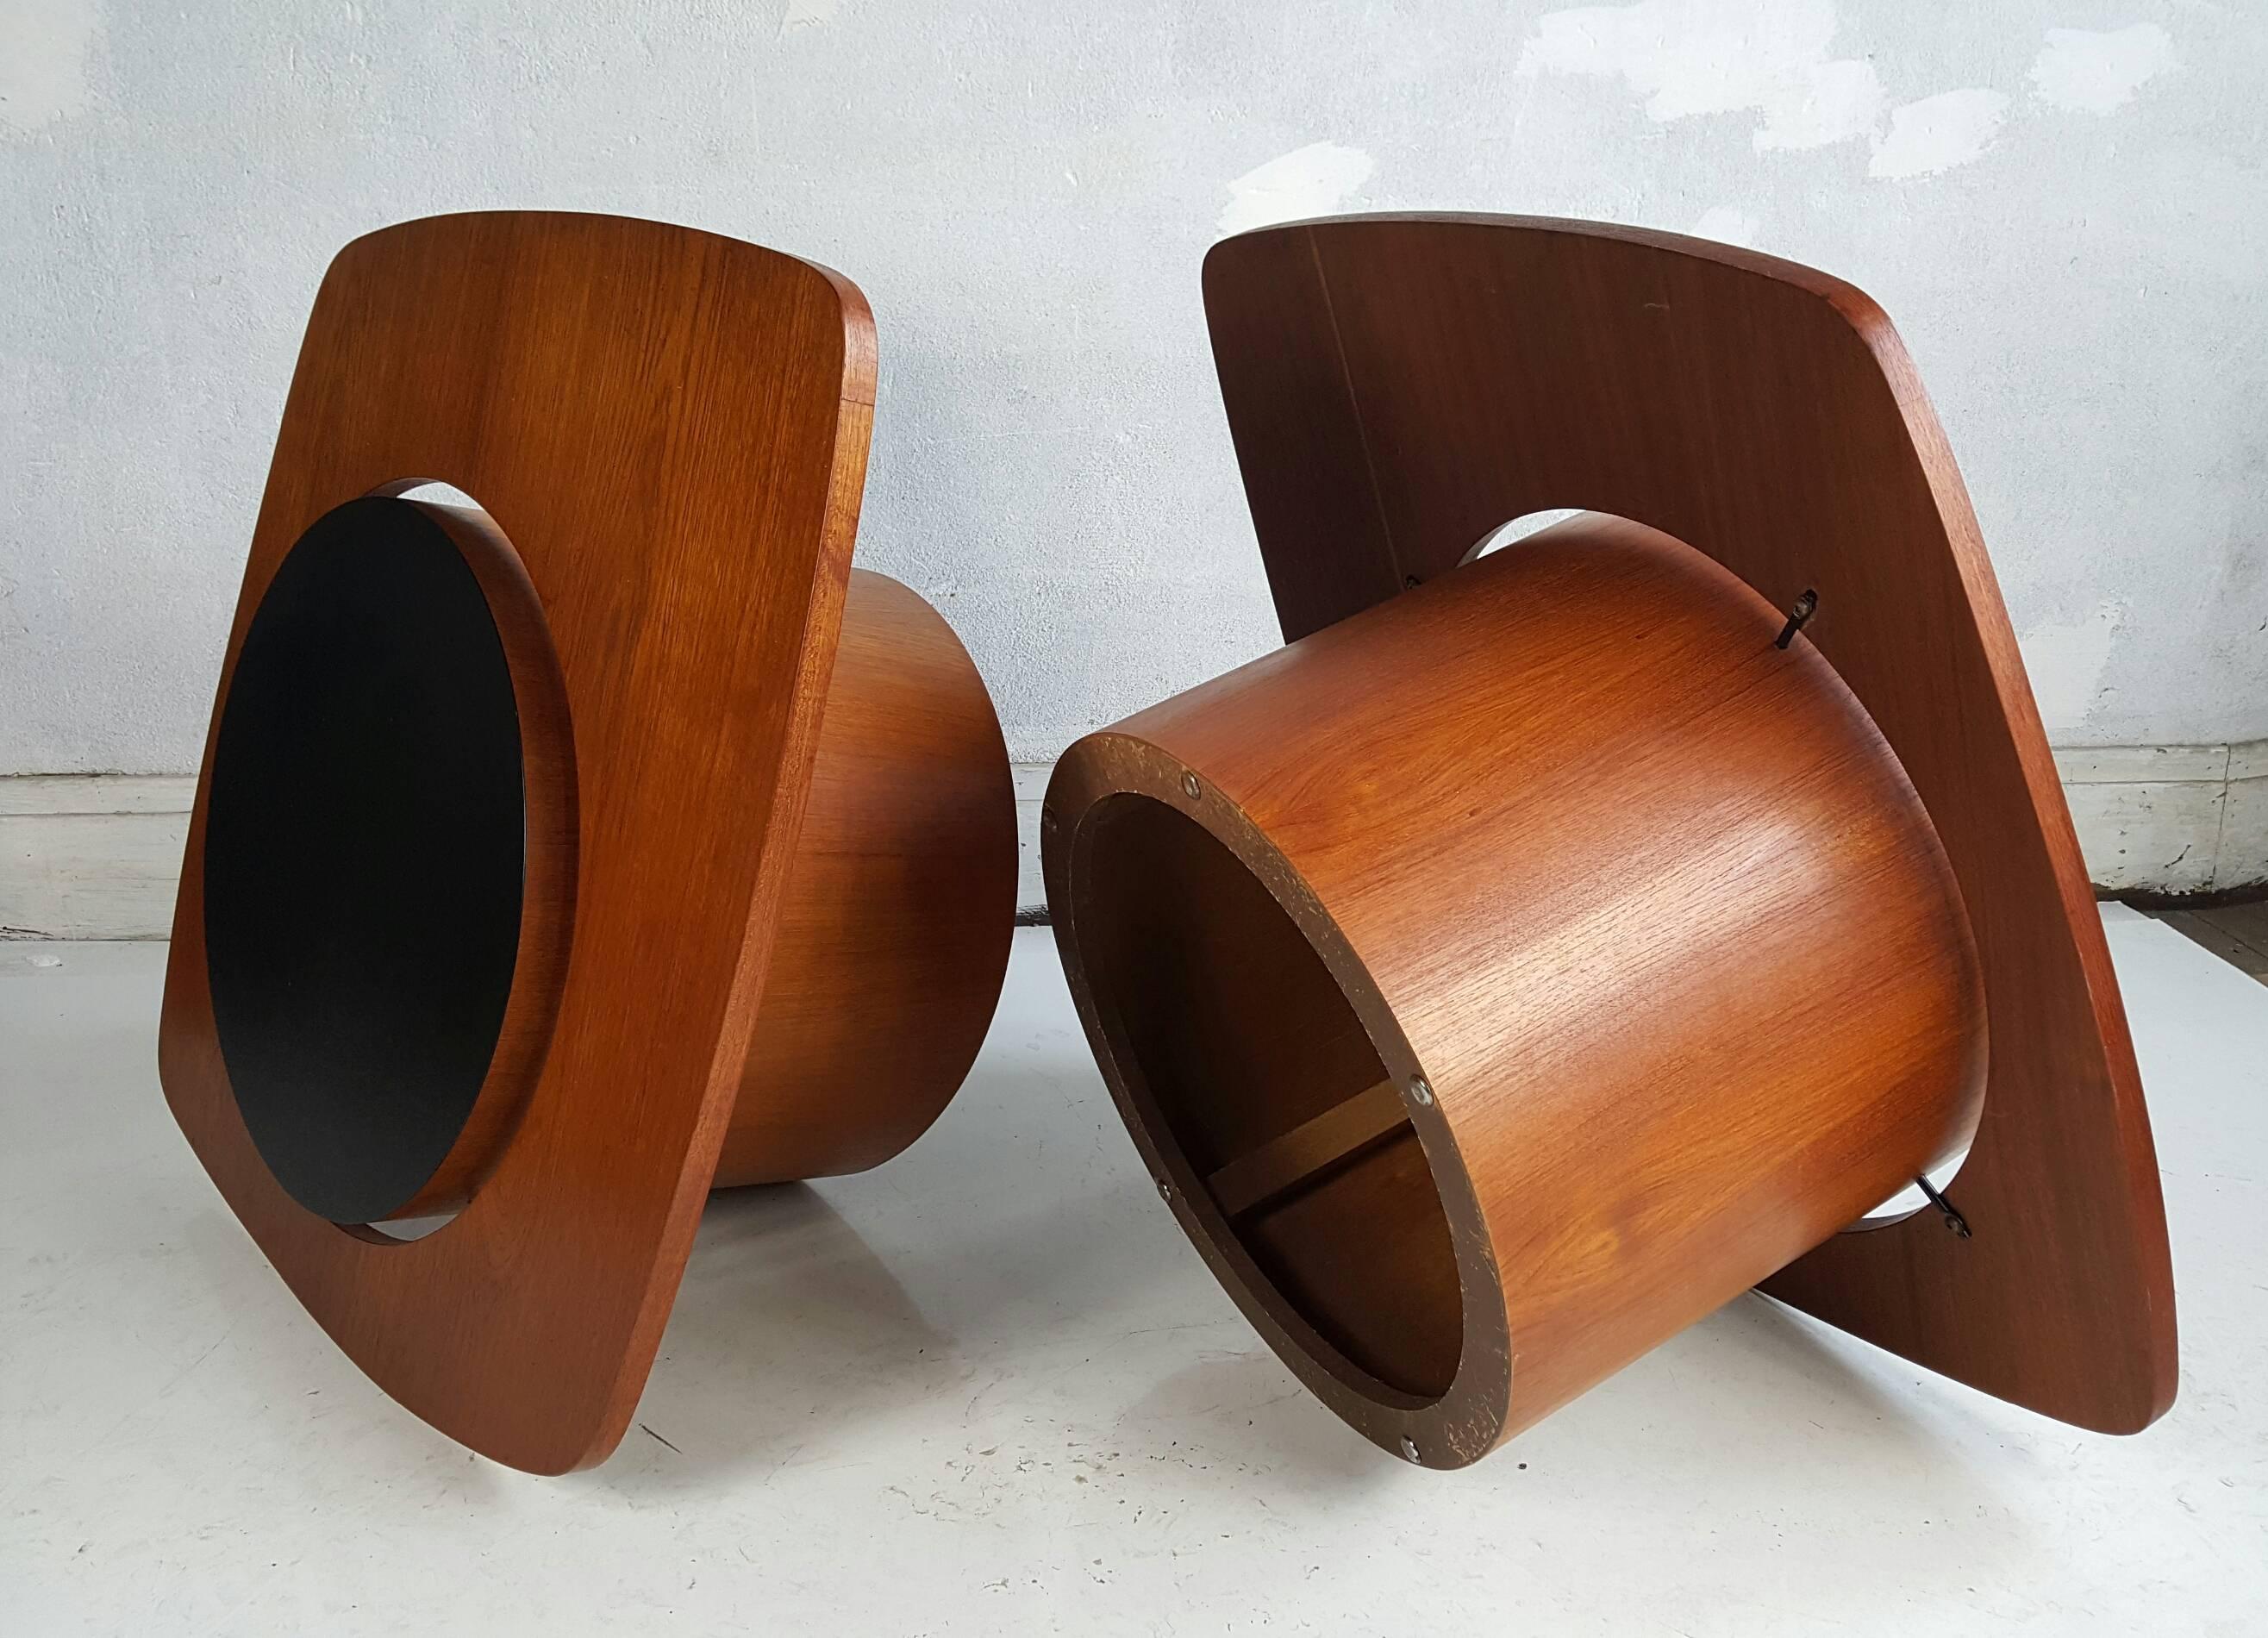 Laminate Rare Oversized Teak Expo 67 Pair of Cocktail Tables by RS Associates